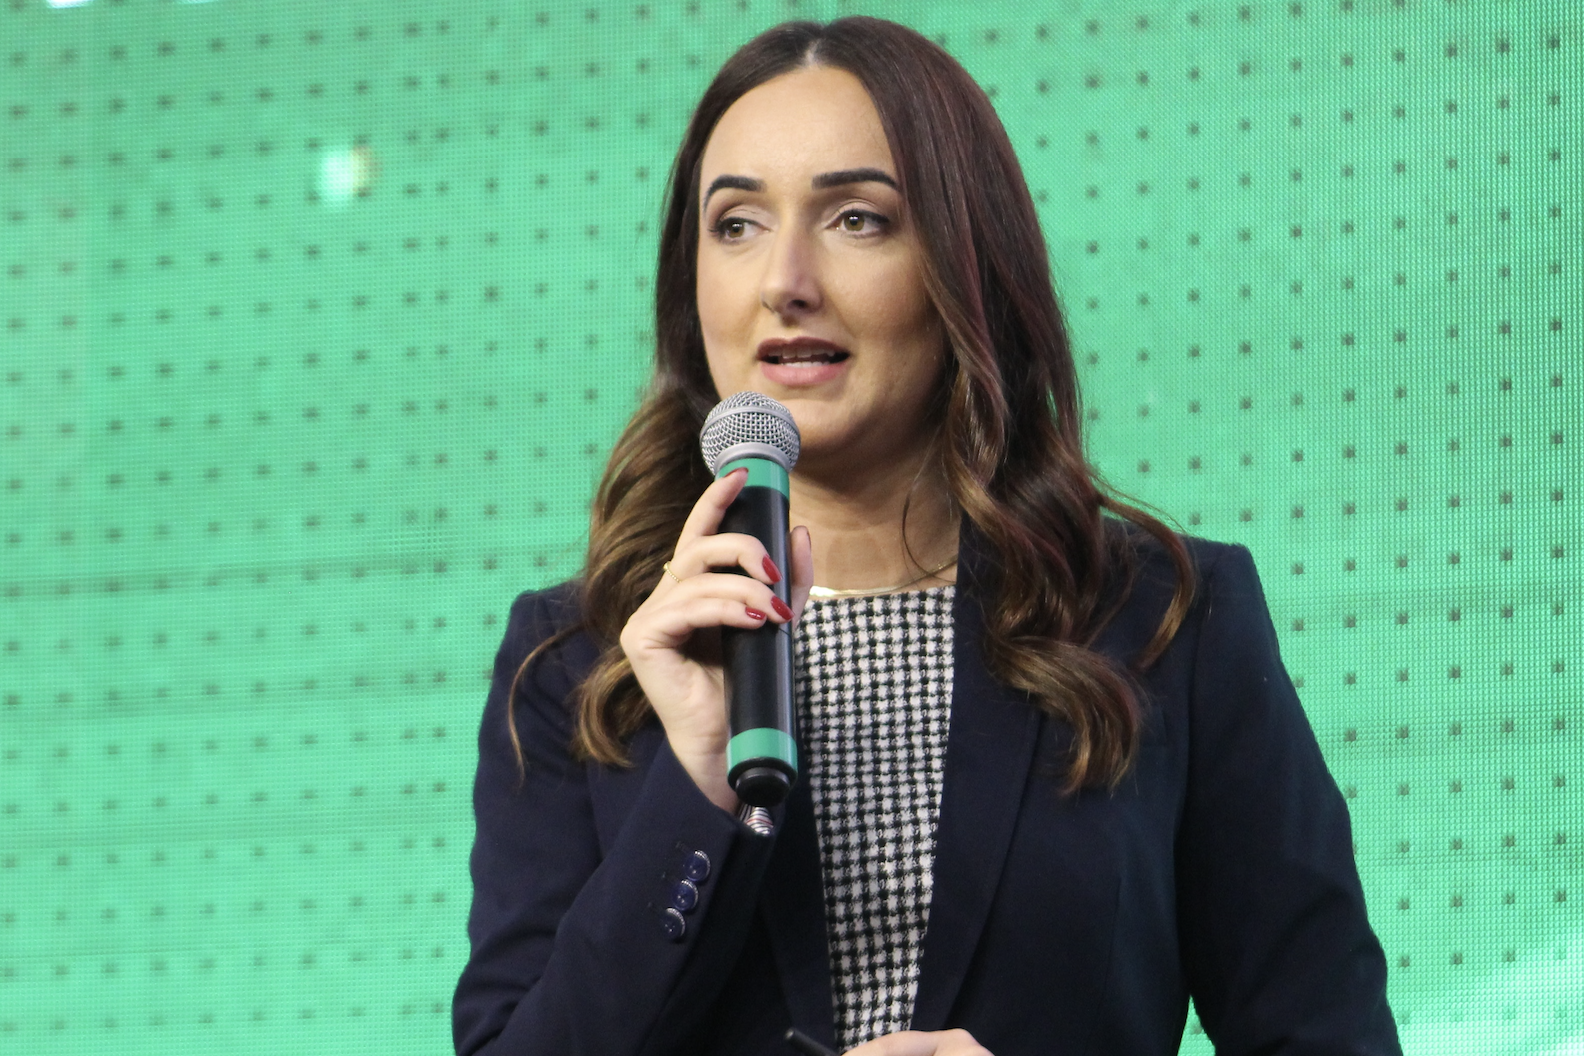 Joana Colossi standing with a microphone pointed towards her mouth